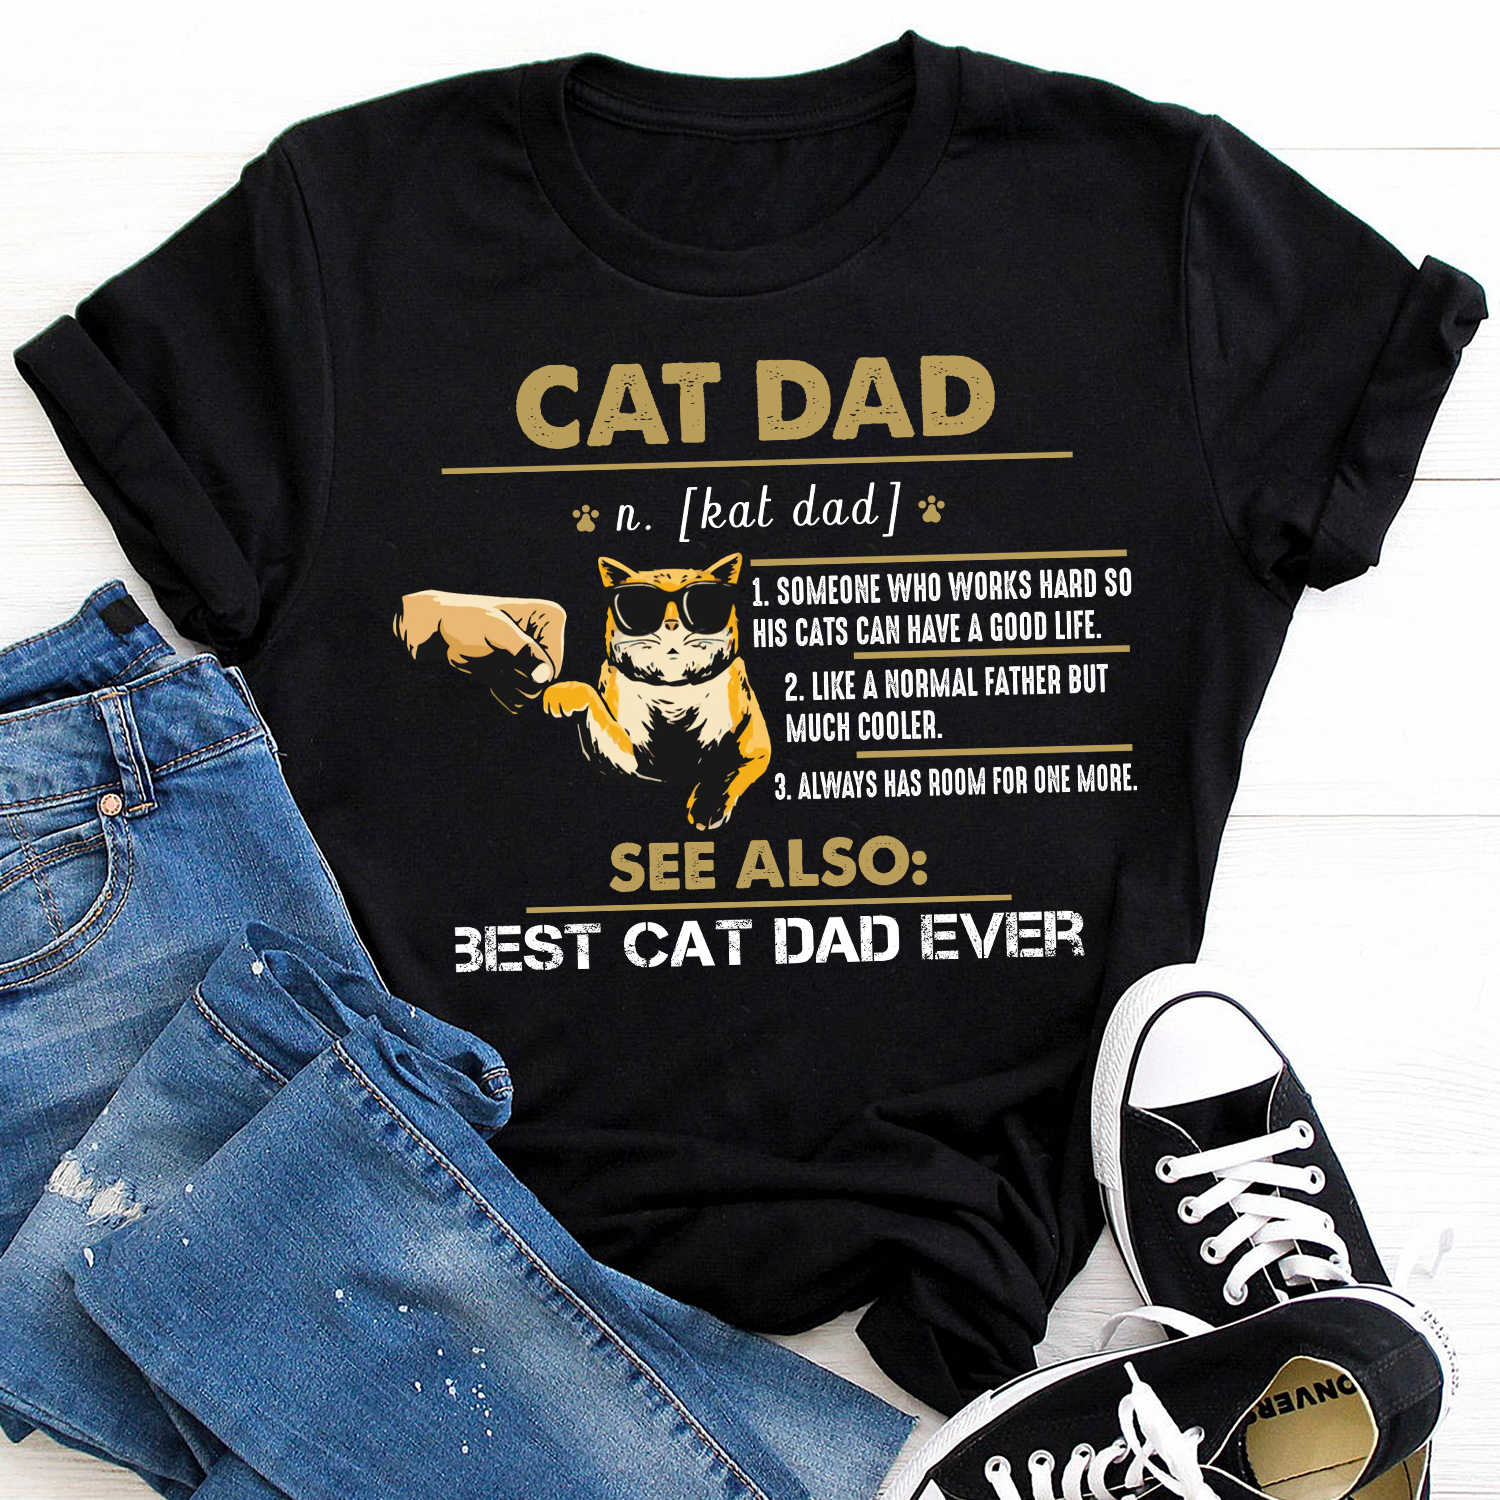 Cat Dad Someone Who Works Hard So His Cats Ca Have A Good Life Like A Normal Father But Much Cooler Always Has Room For One More Standard T-shirt